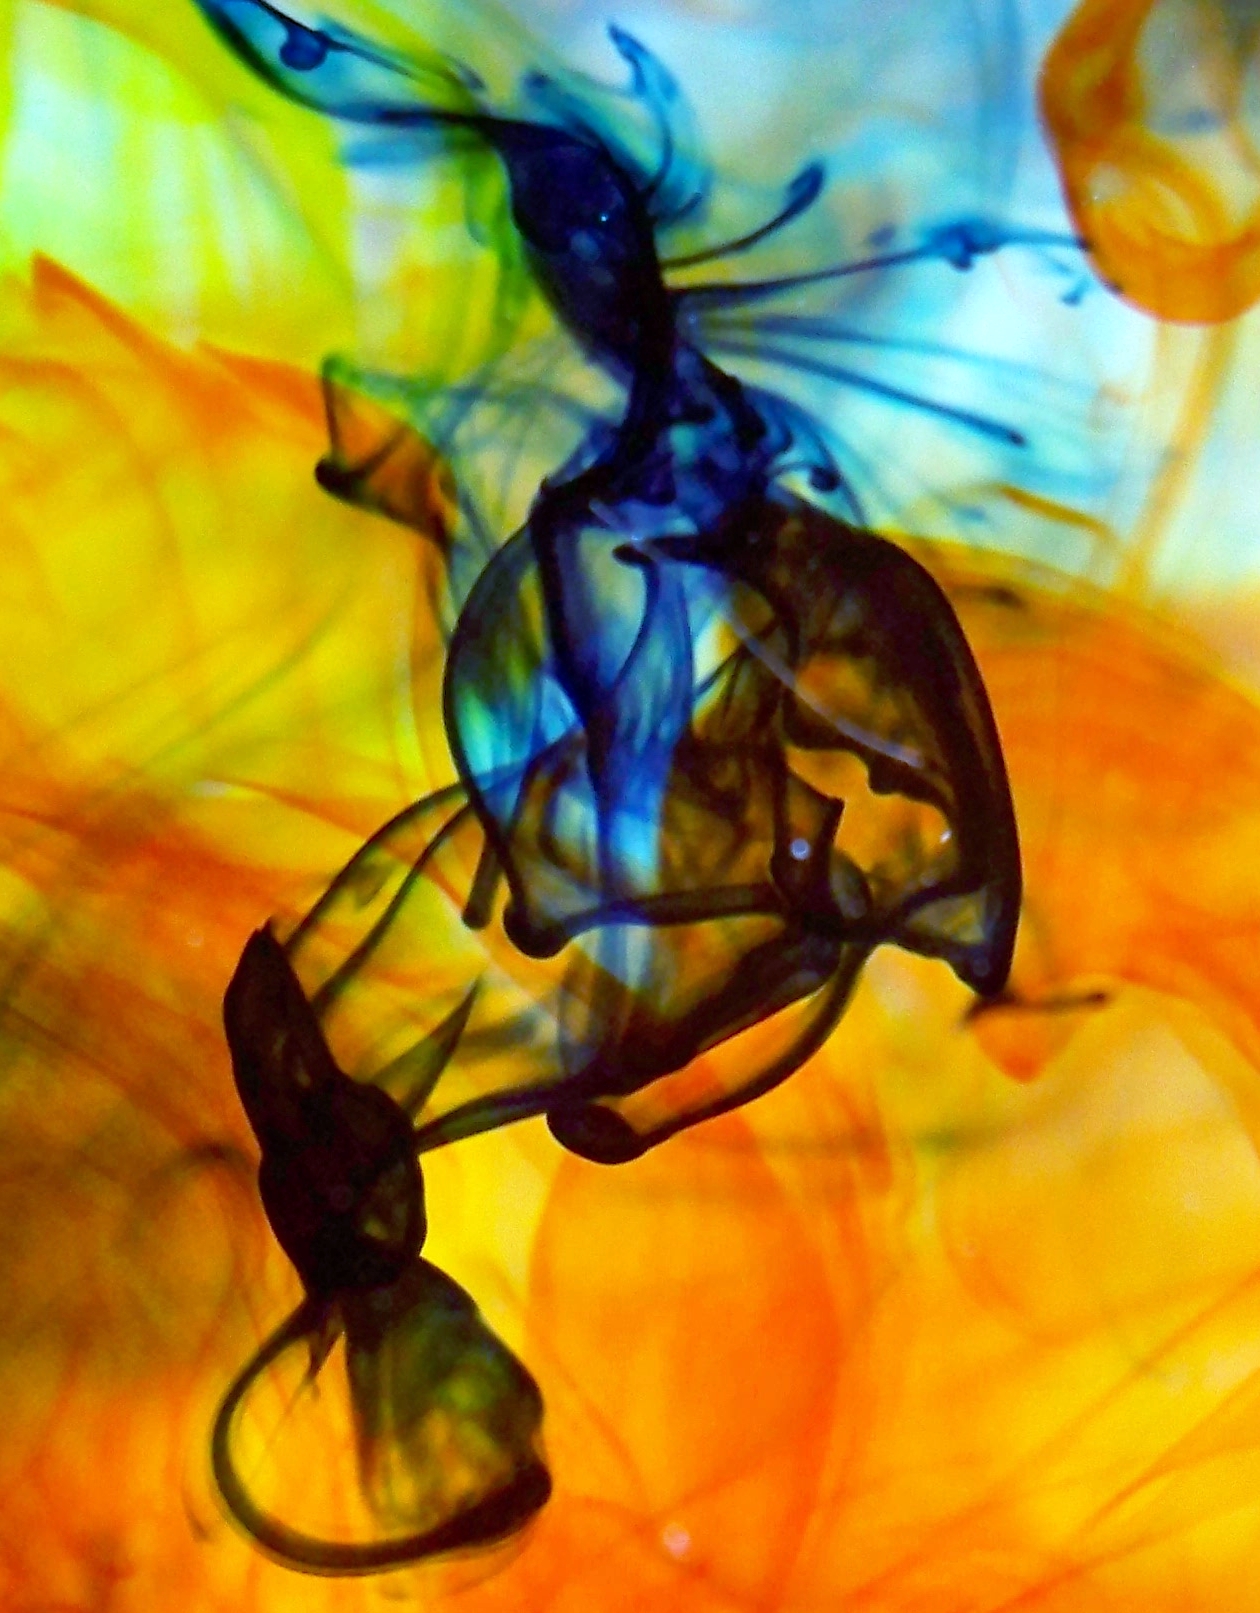 Abstract Photograph: 'Underwater Dance of the Bat-Winged Mermaid' by artist and photographer John Russell